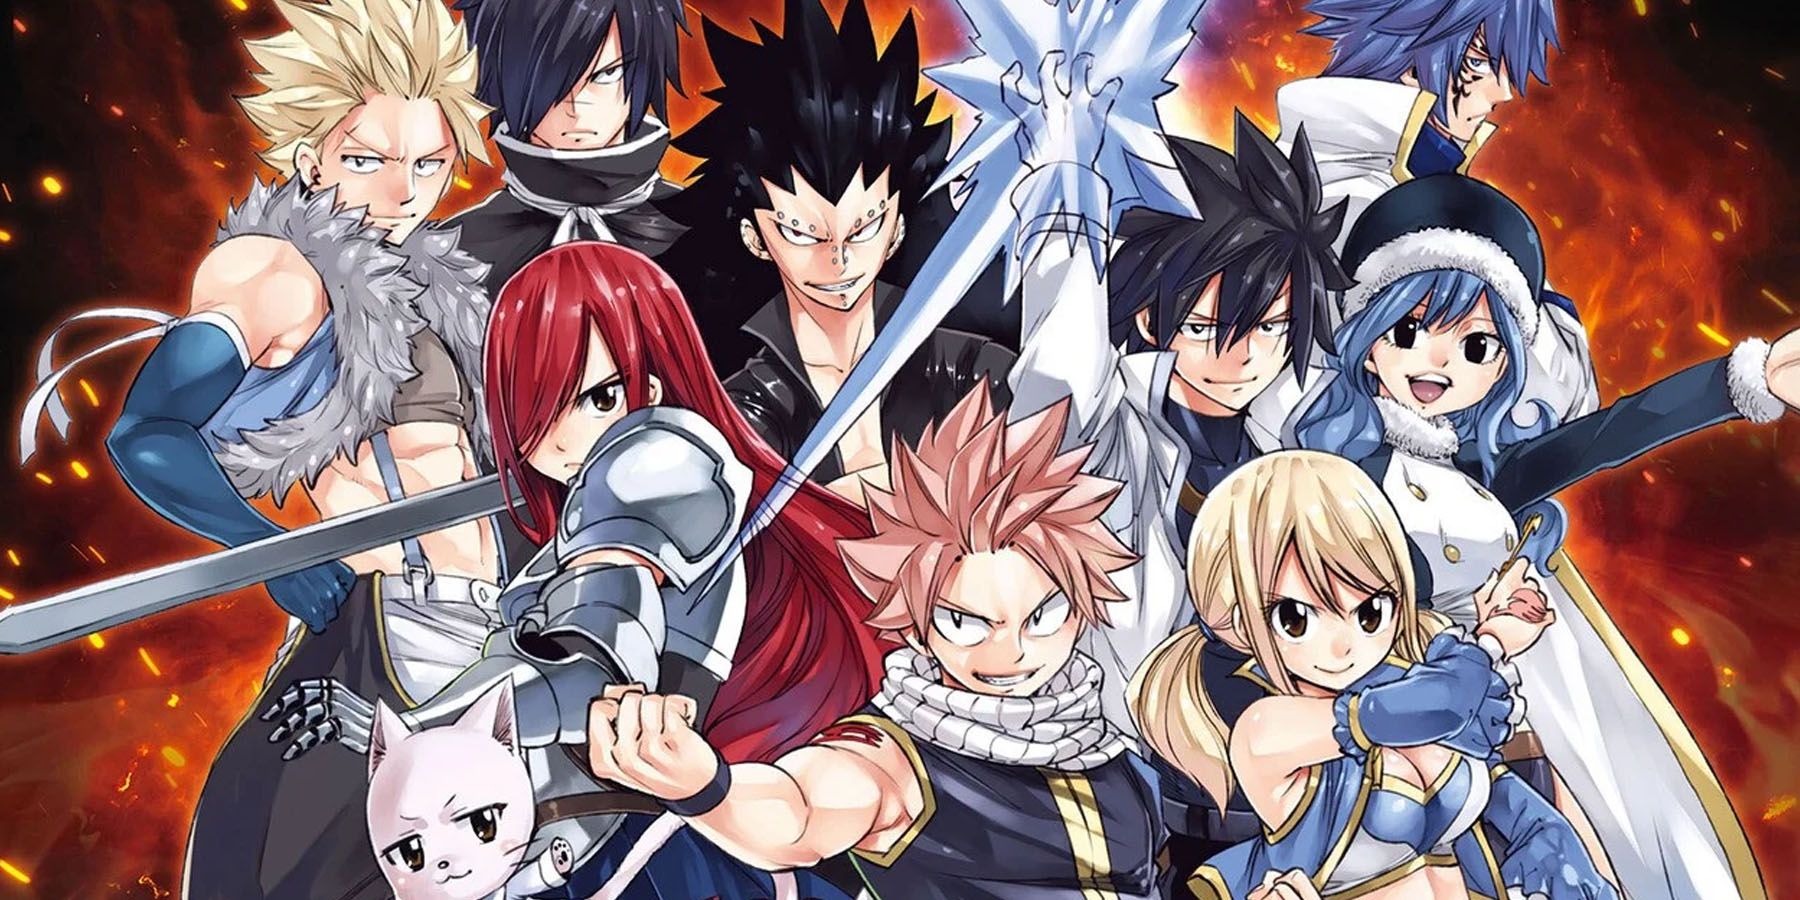 The main cast of Fairy Tail